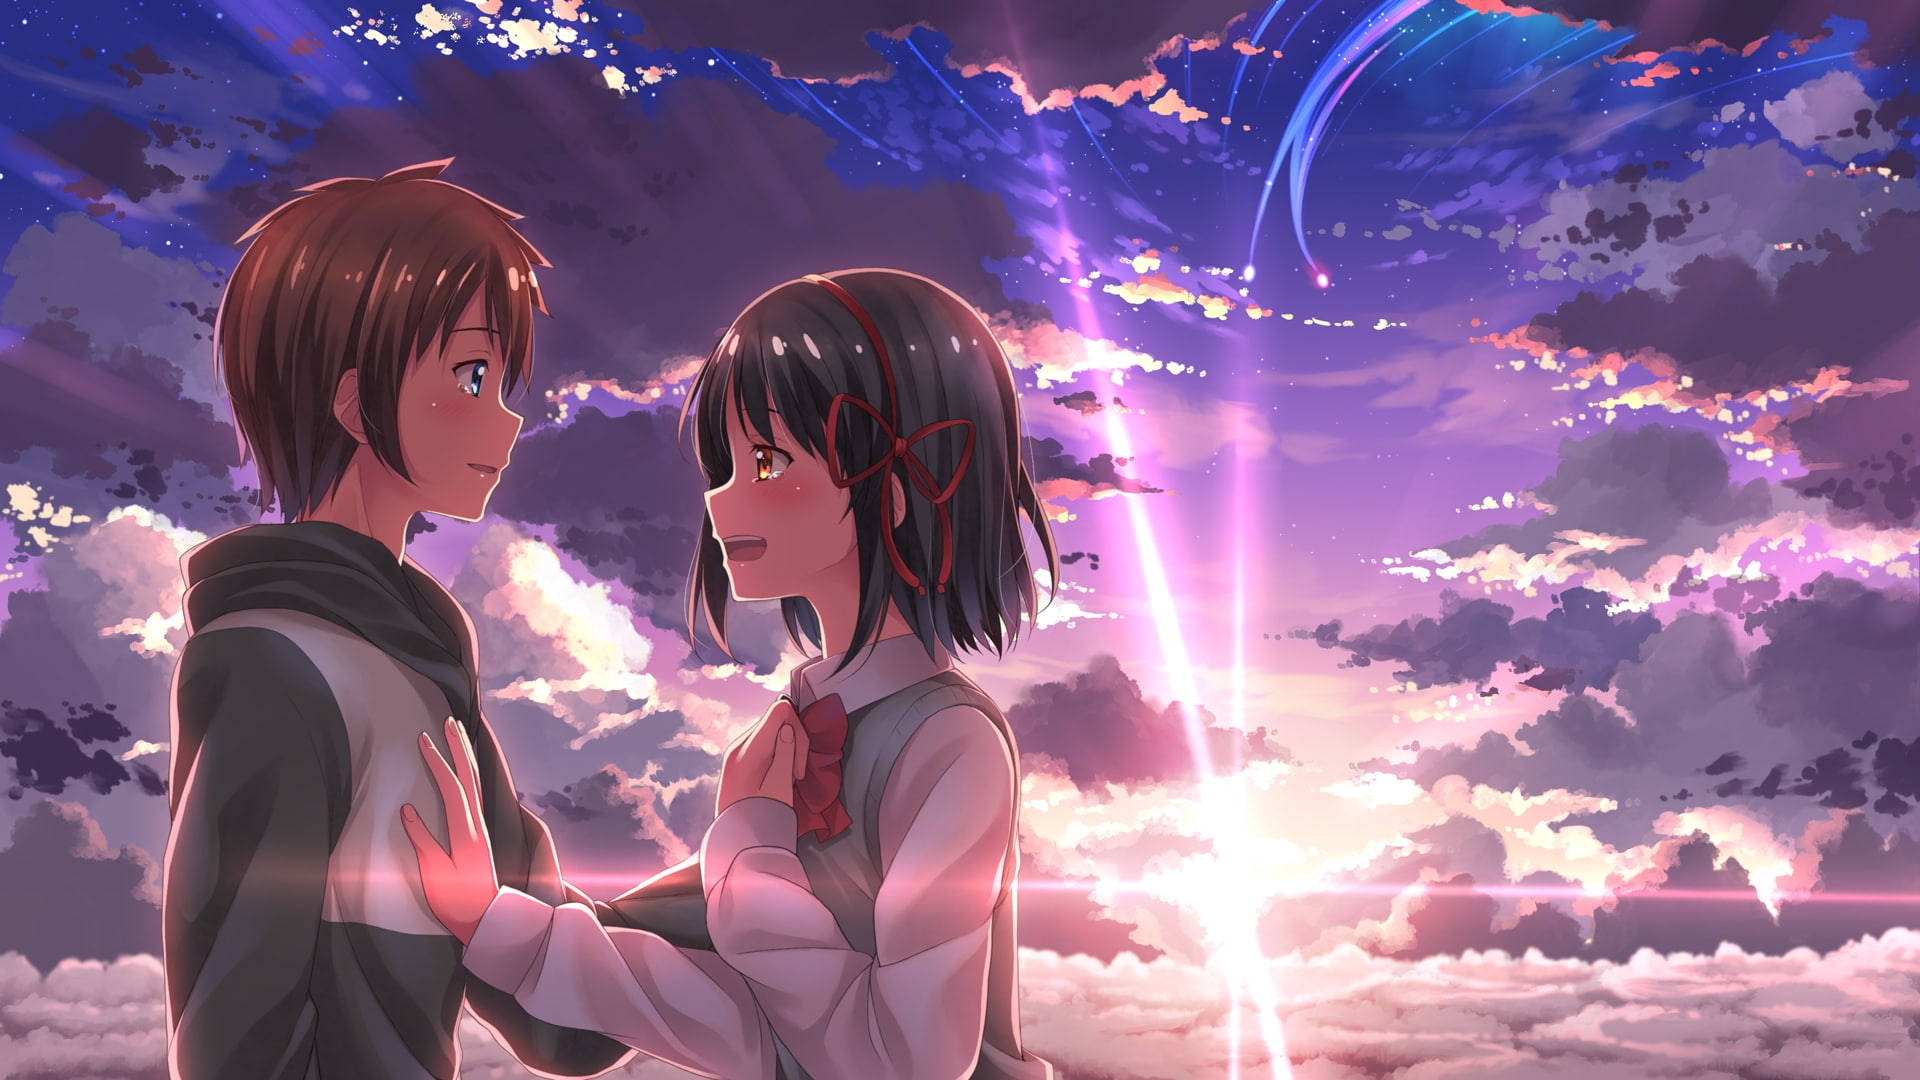 Cute Anime Couple And Cloudy Sunset Background